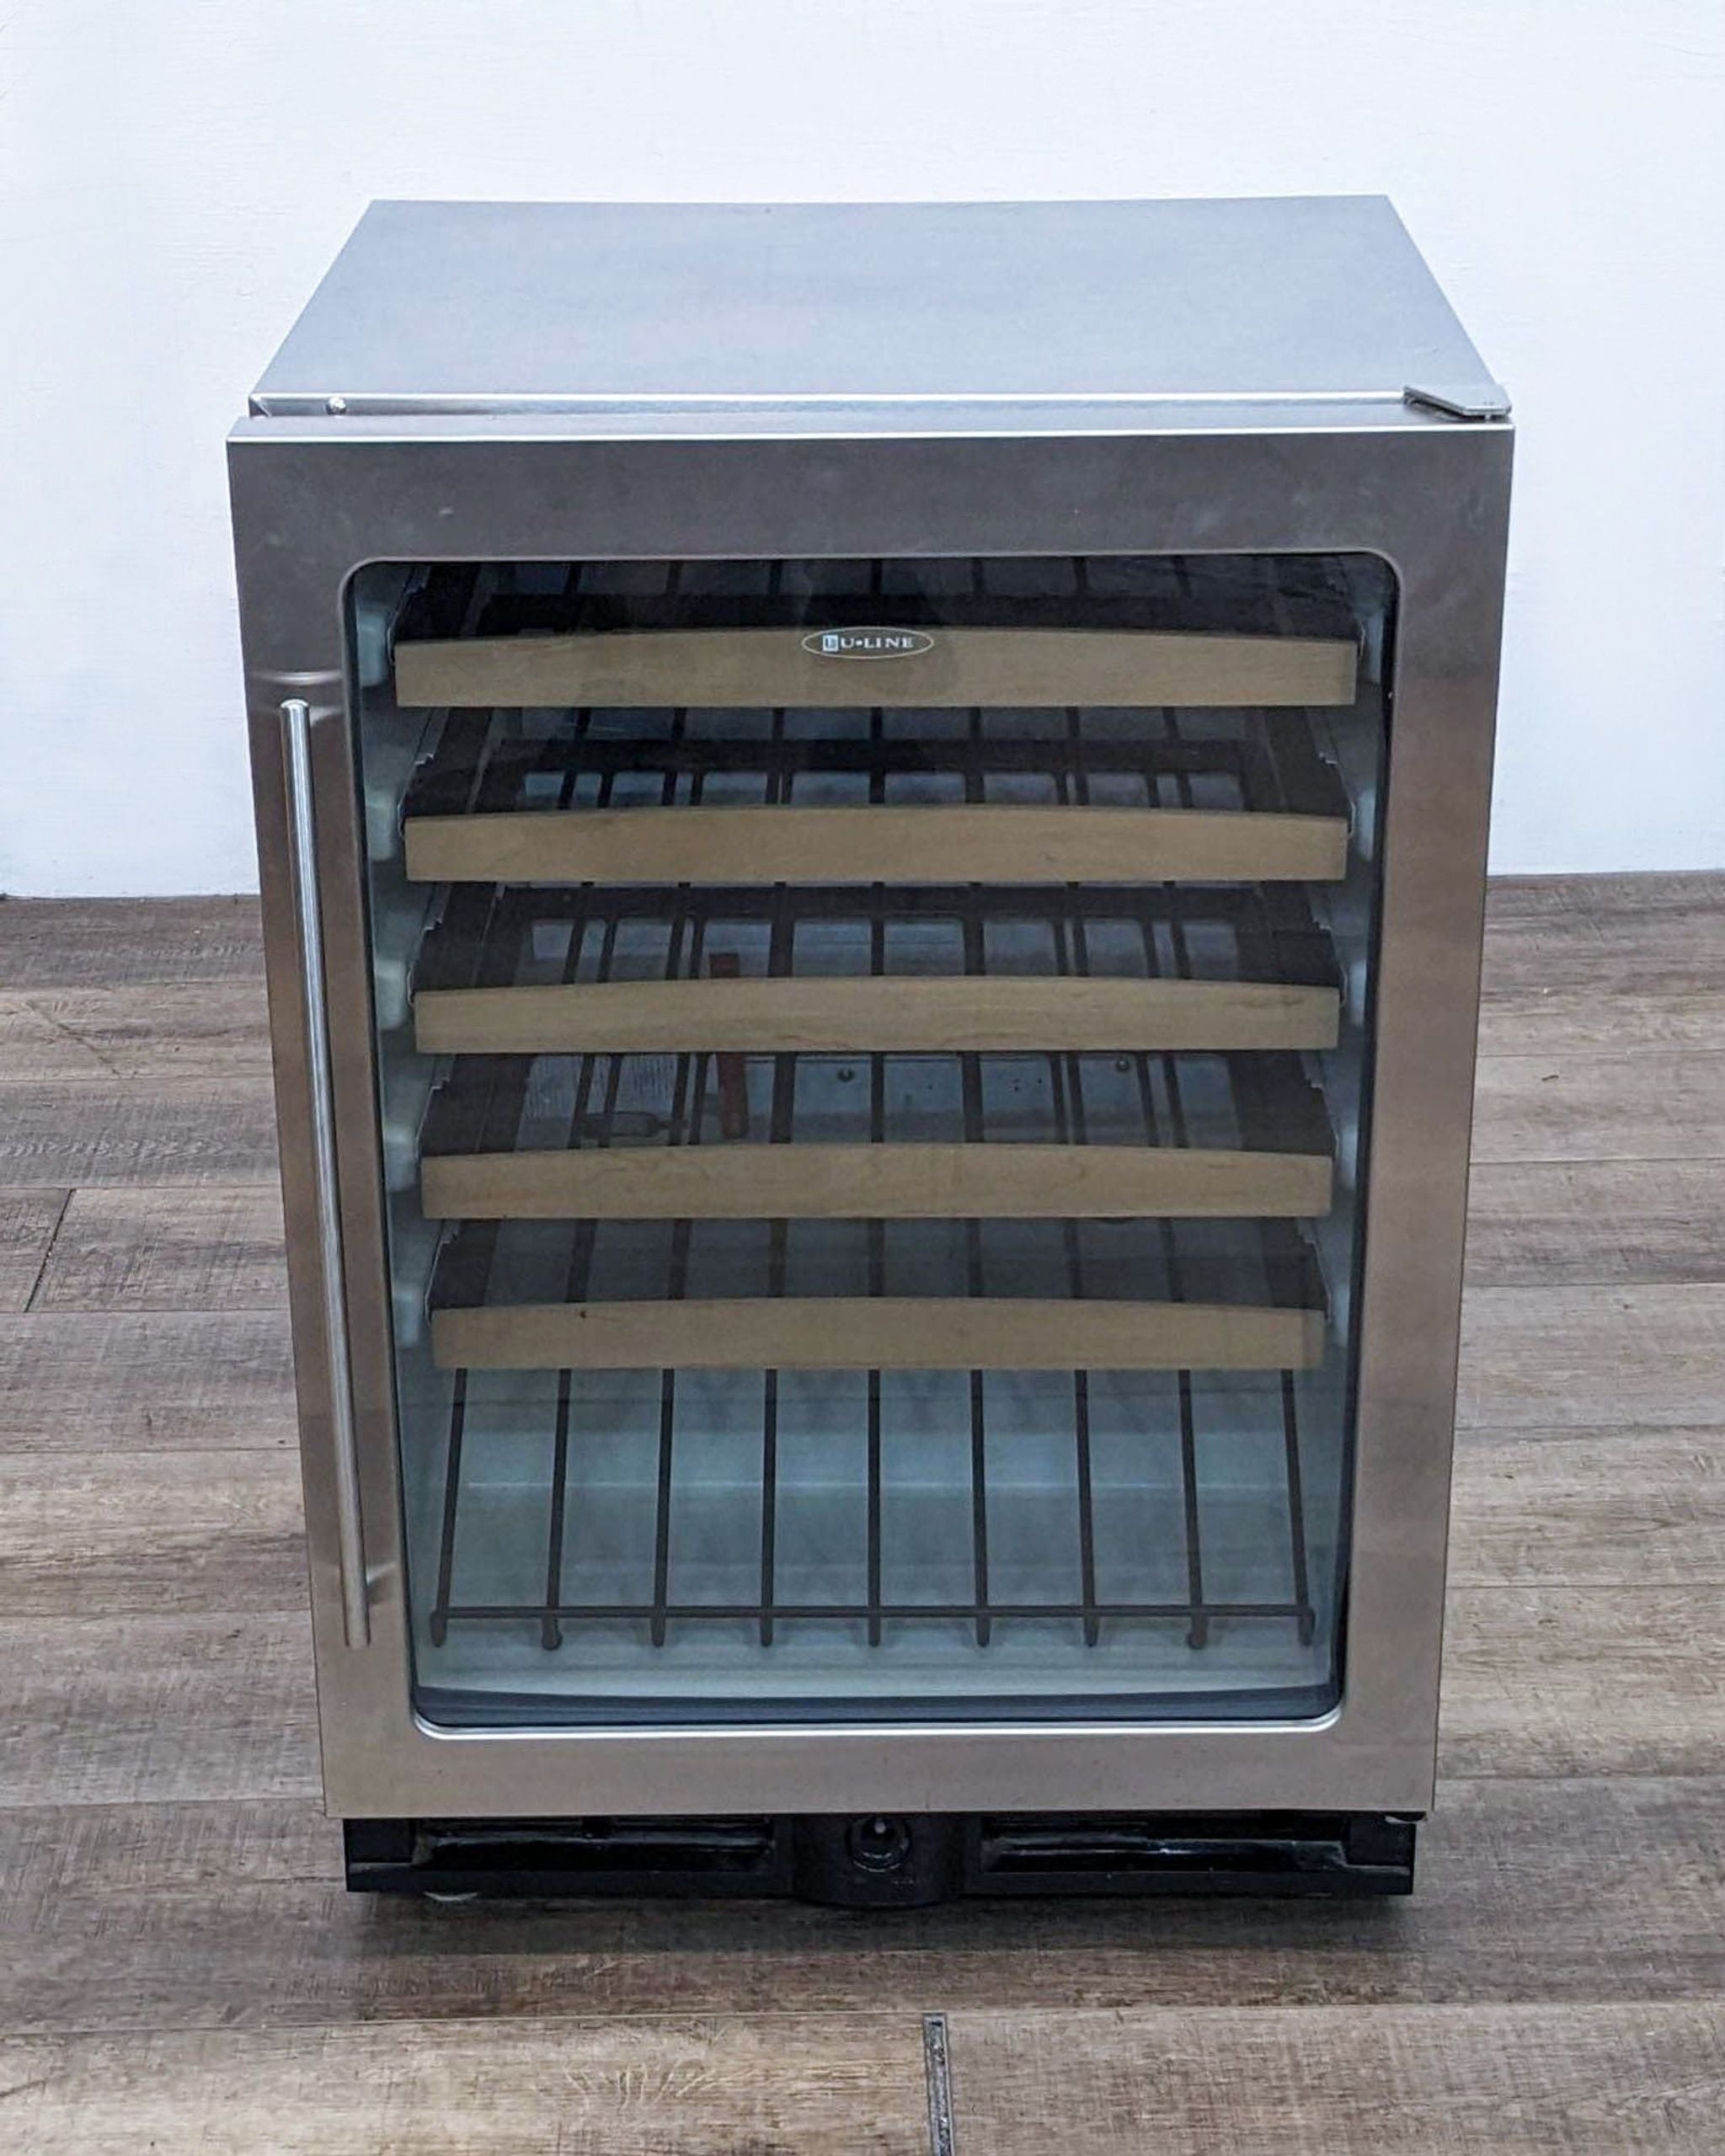 U-Line brand stainless steel refrigerator with glass door and visible shelves, standing on a wooden floor.